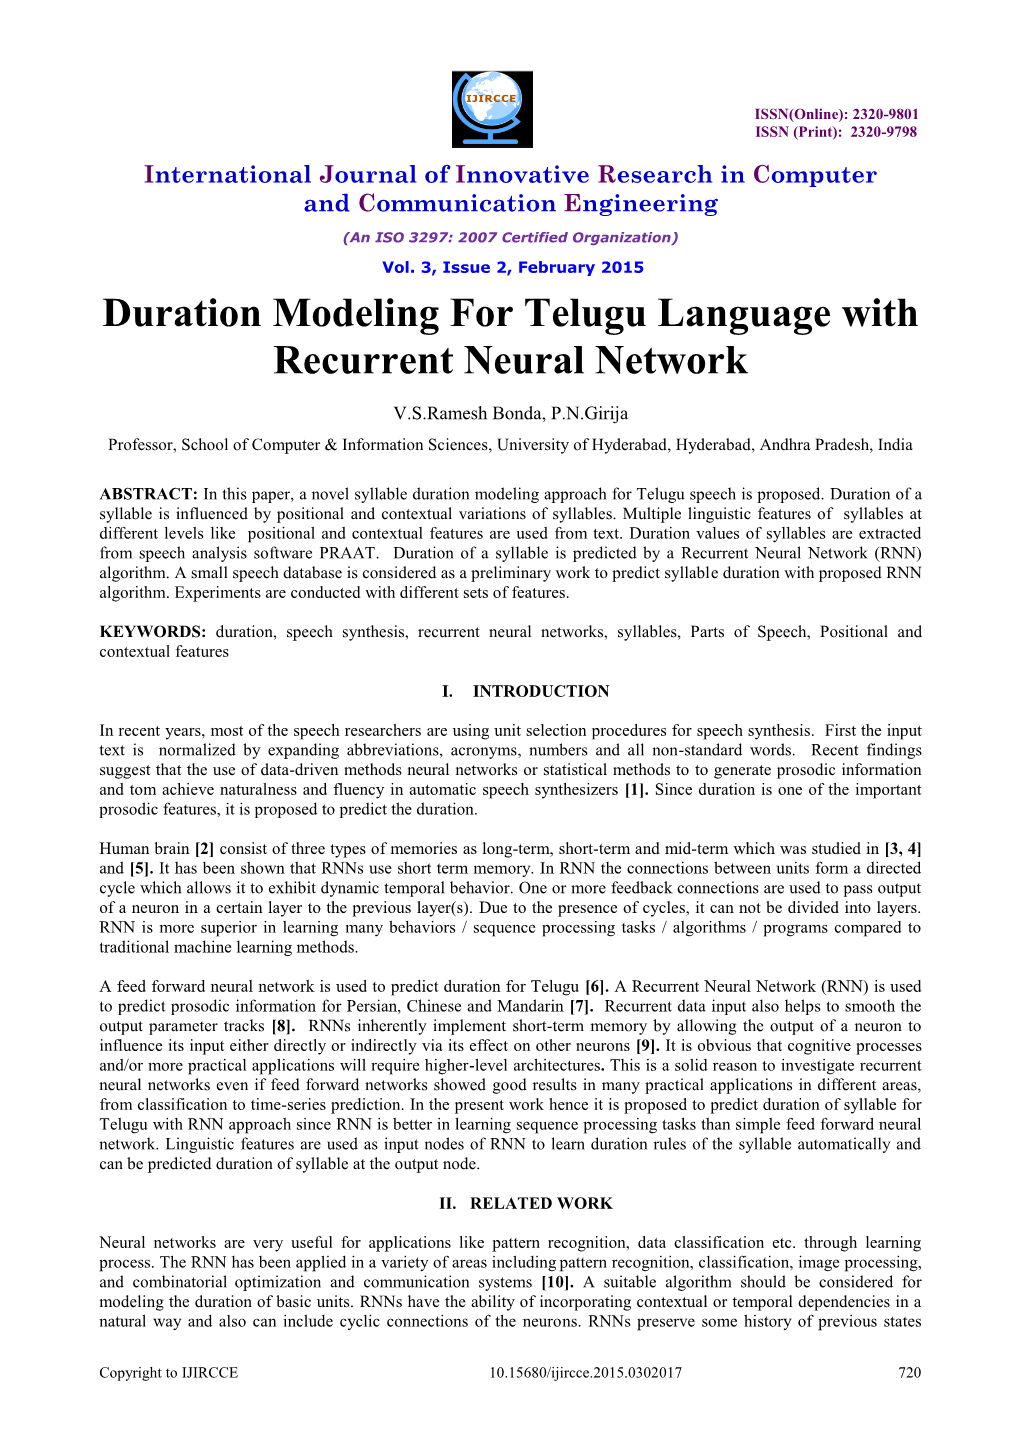 Duration Modeling for Telugu Language with Recurrent Neural Network